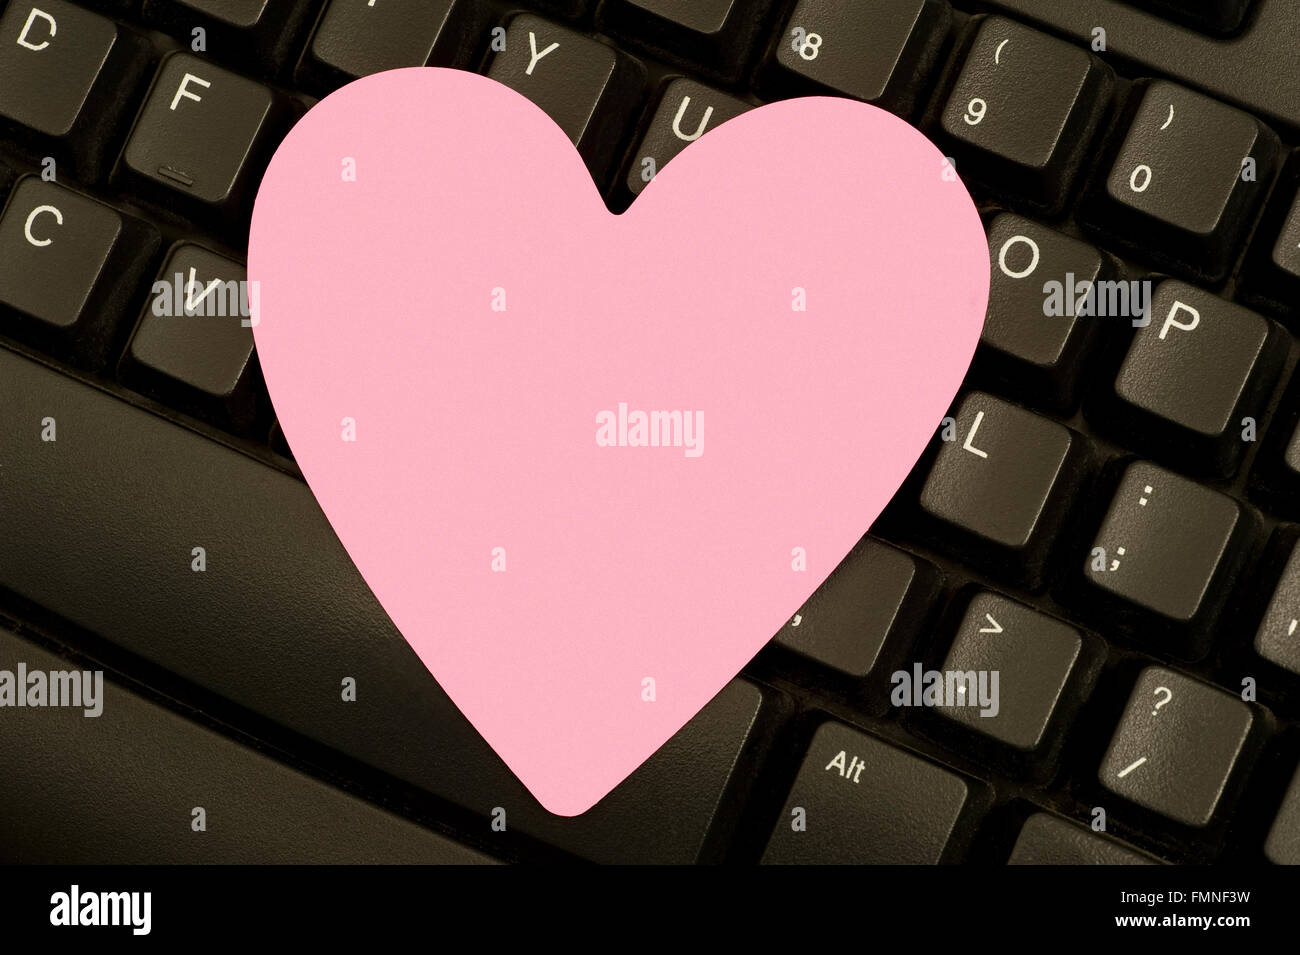 Valentine Posted on Keyboard Stock Photo